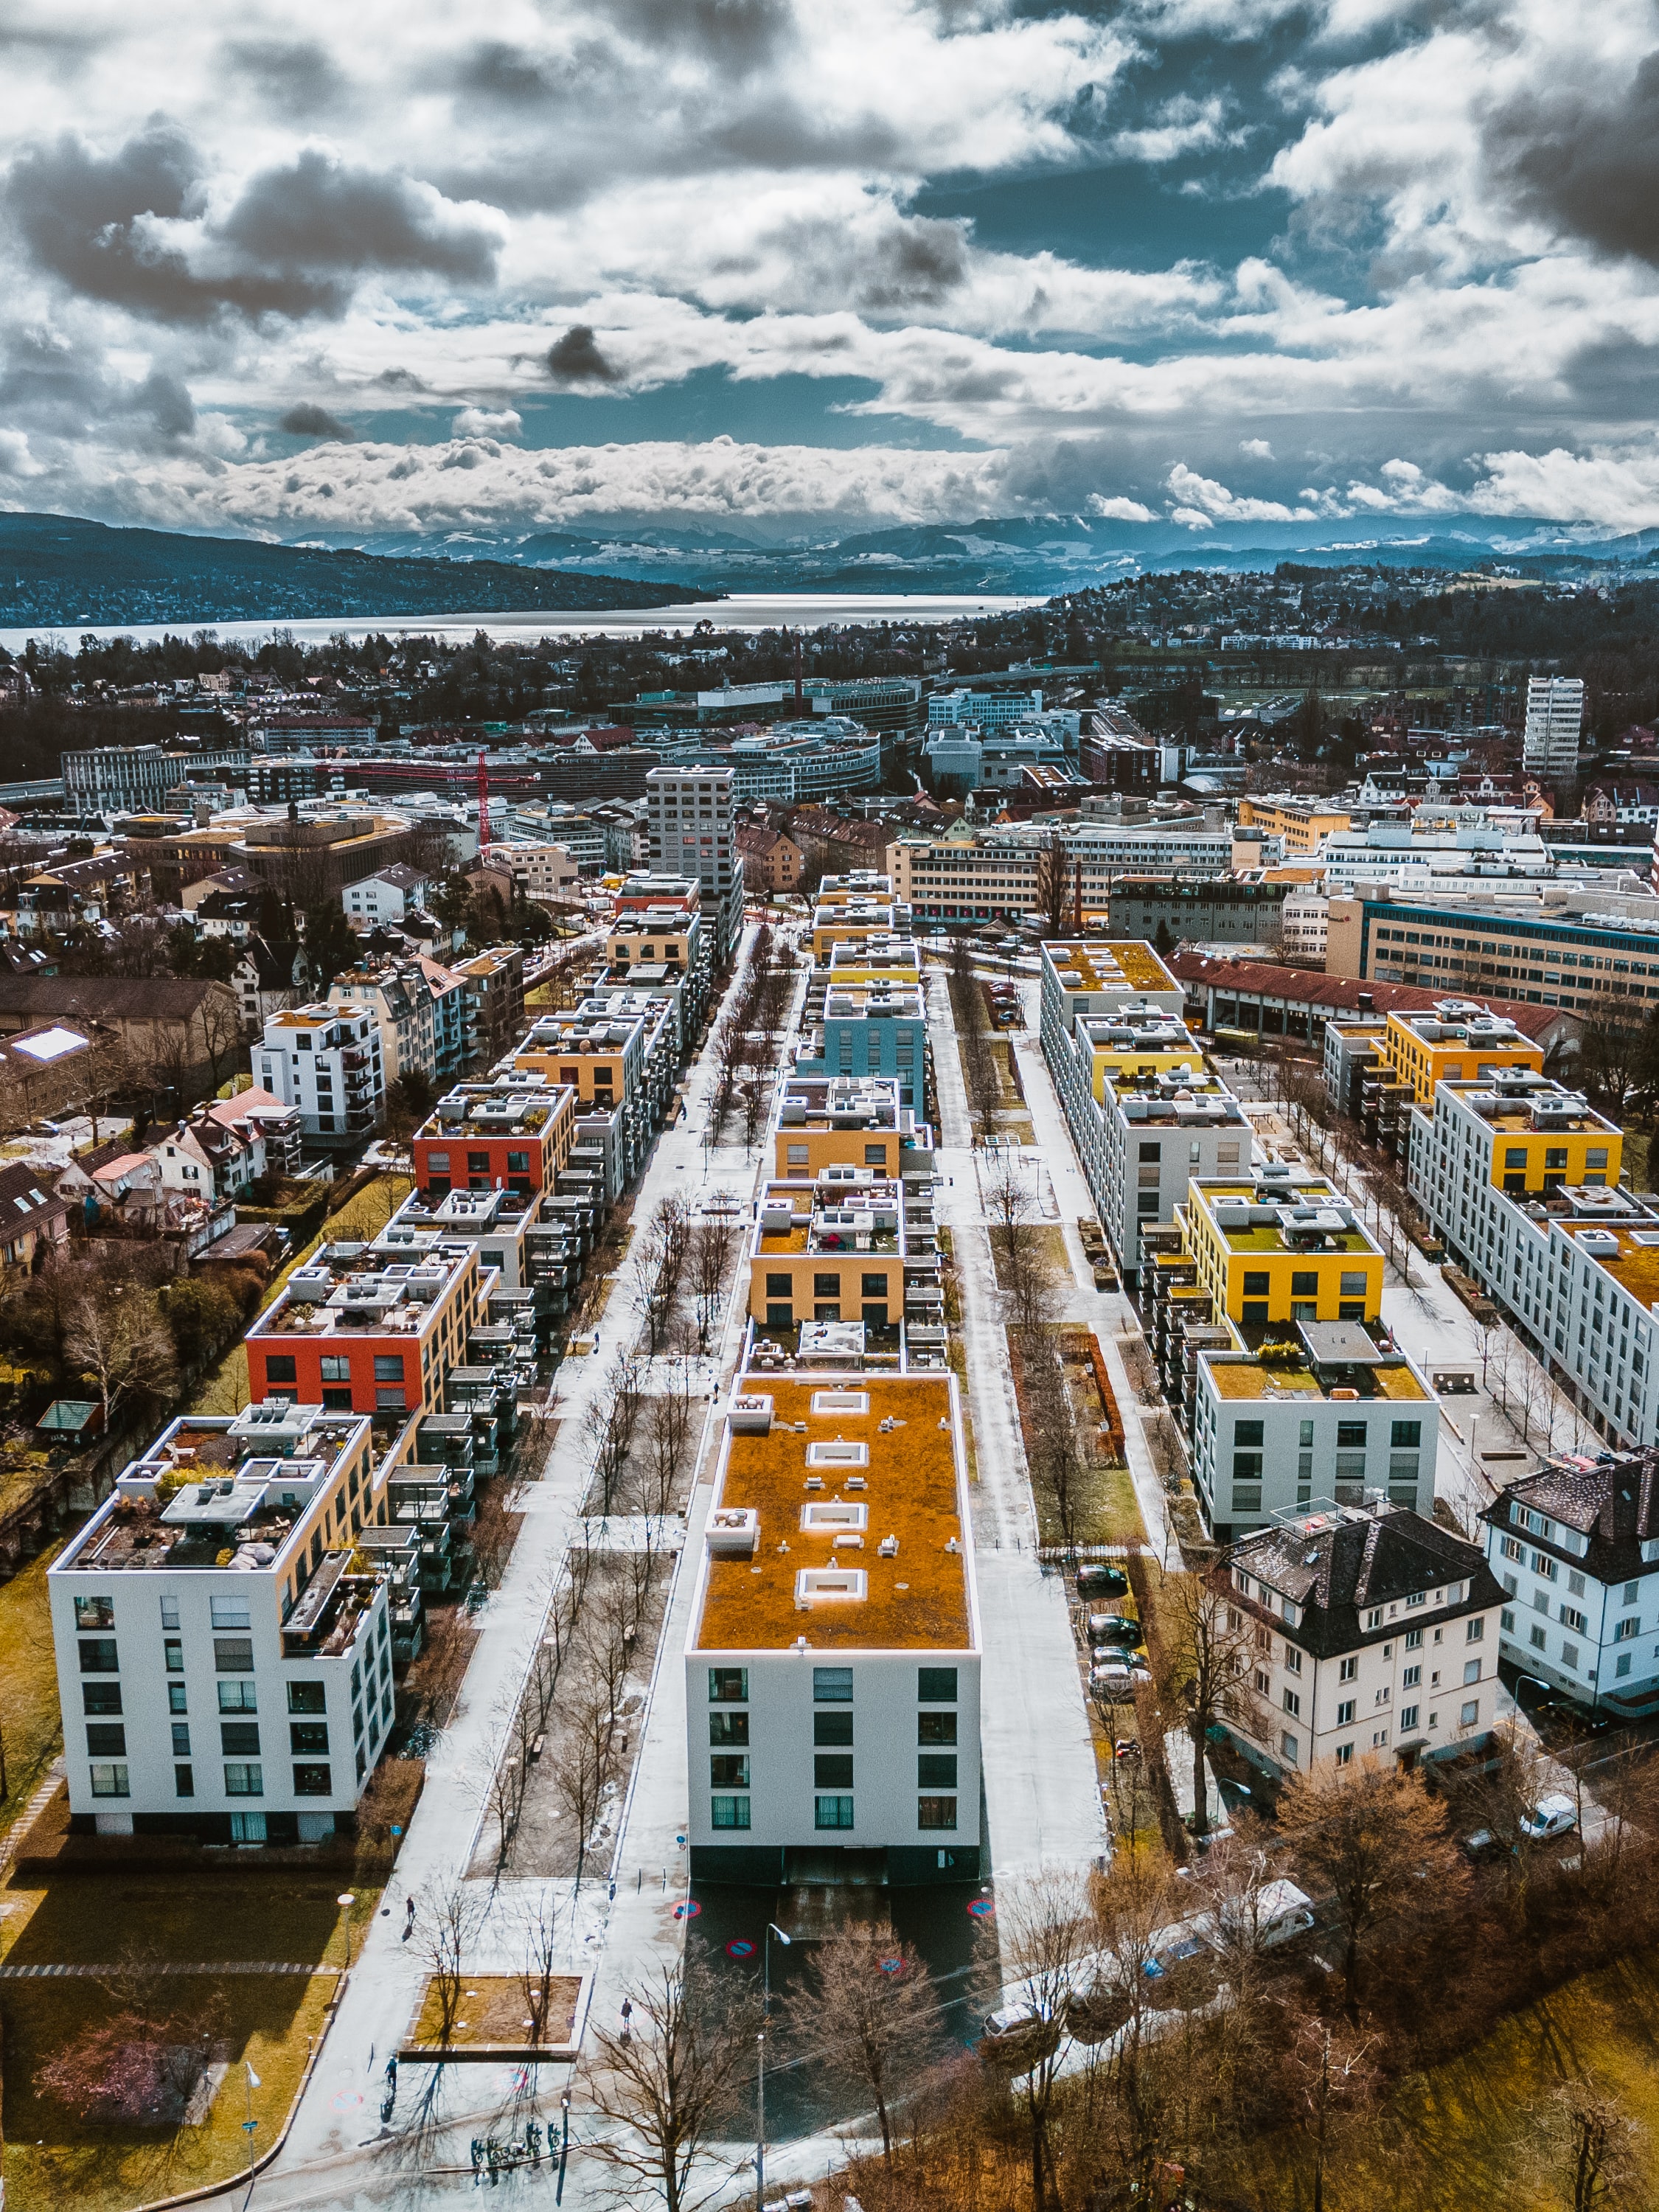 cities, winter, snow, city, building, view from above, urban landscape, cityscape